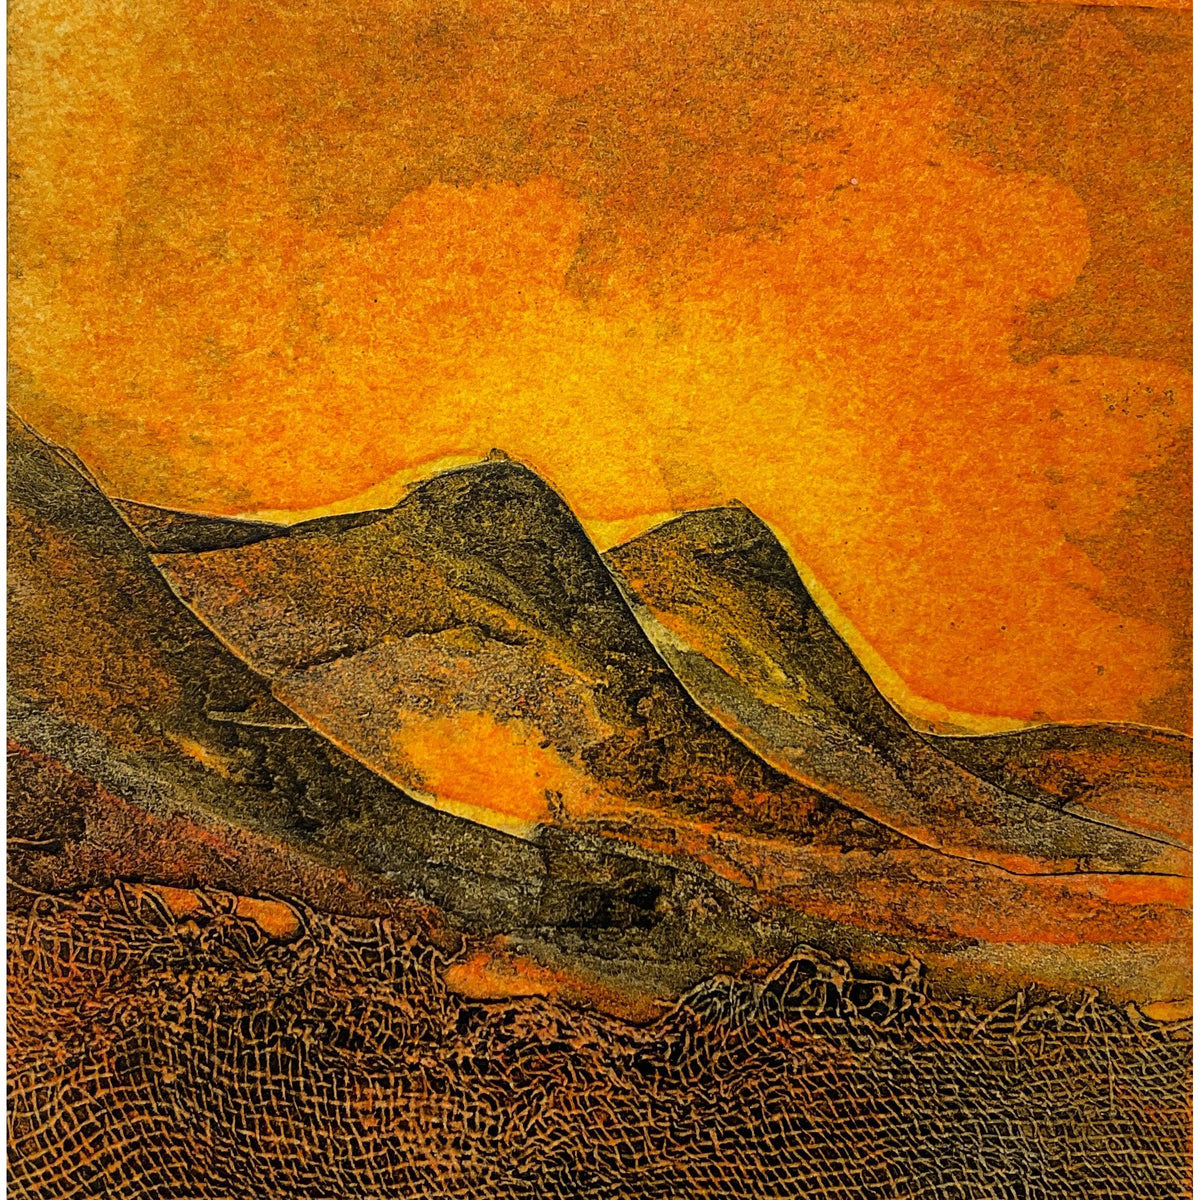 In Glen Coe, limited edition collagraph  by Sarah Ross-Thompson available at Padstow Gallery, Cornwall